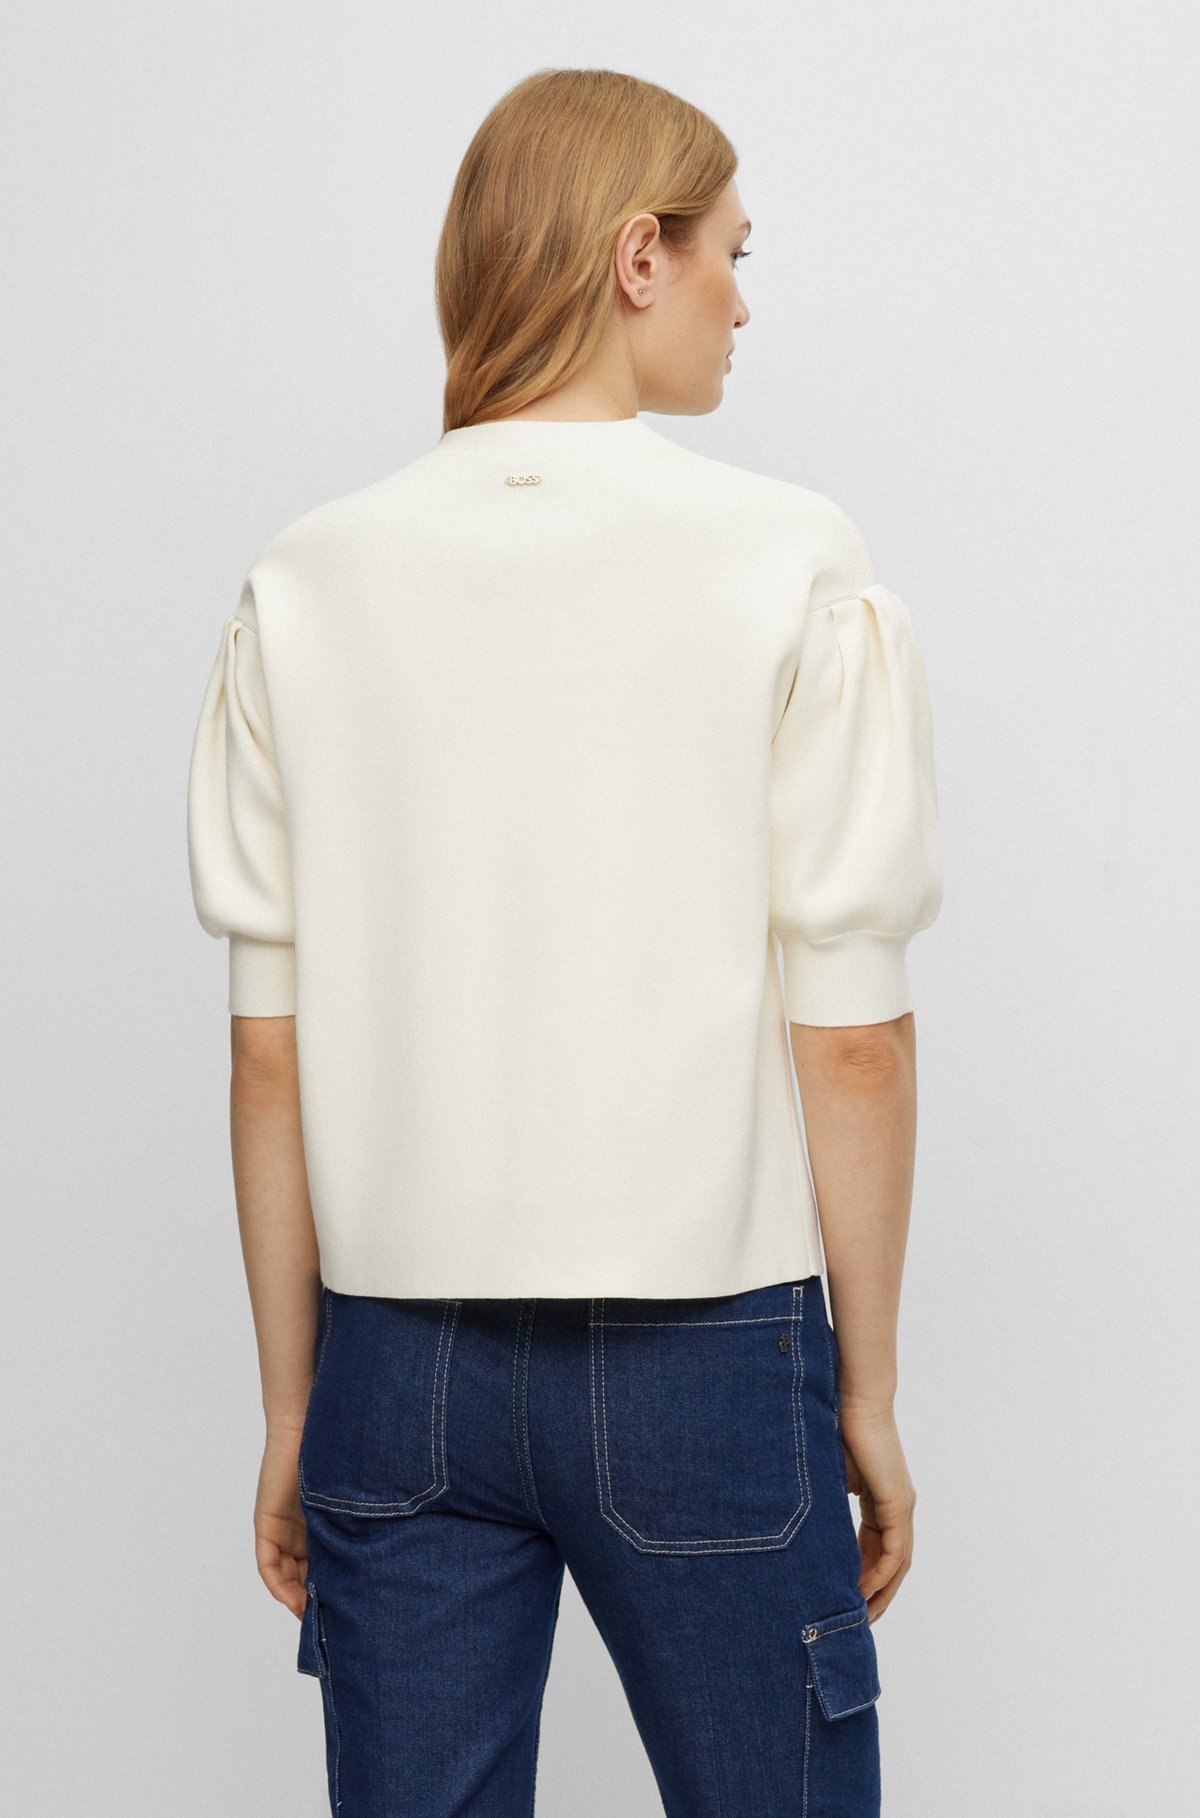 V-neck sweater with puff sleeves, White